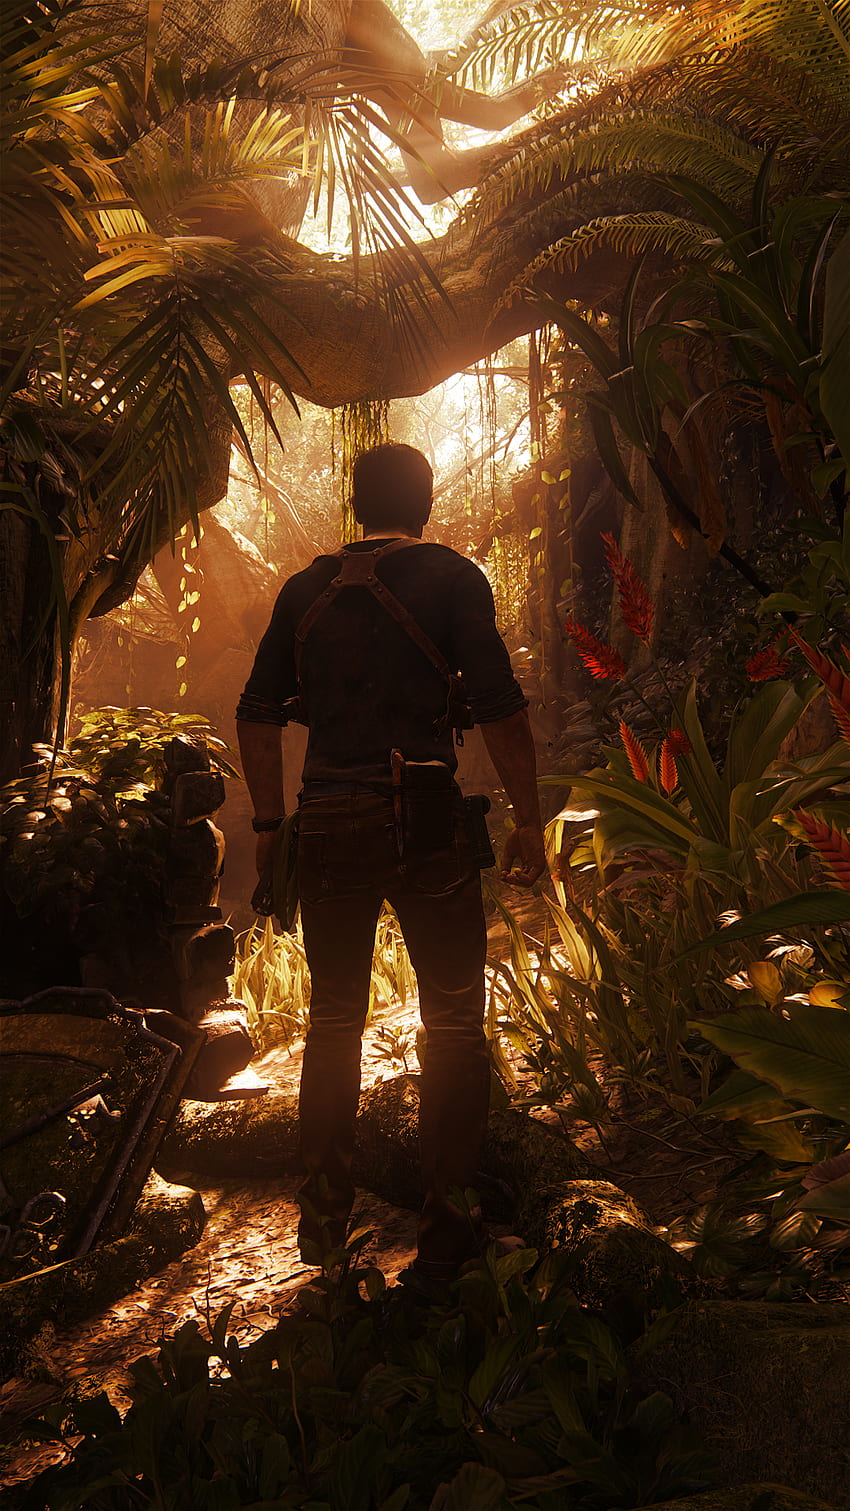 Uncharted 4 - Lock Screen and Home Screen, Uncharted 4 iPhone HD phone wallpaper